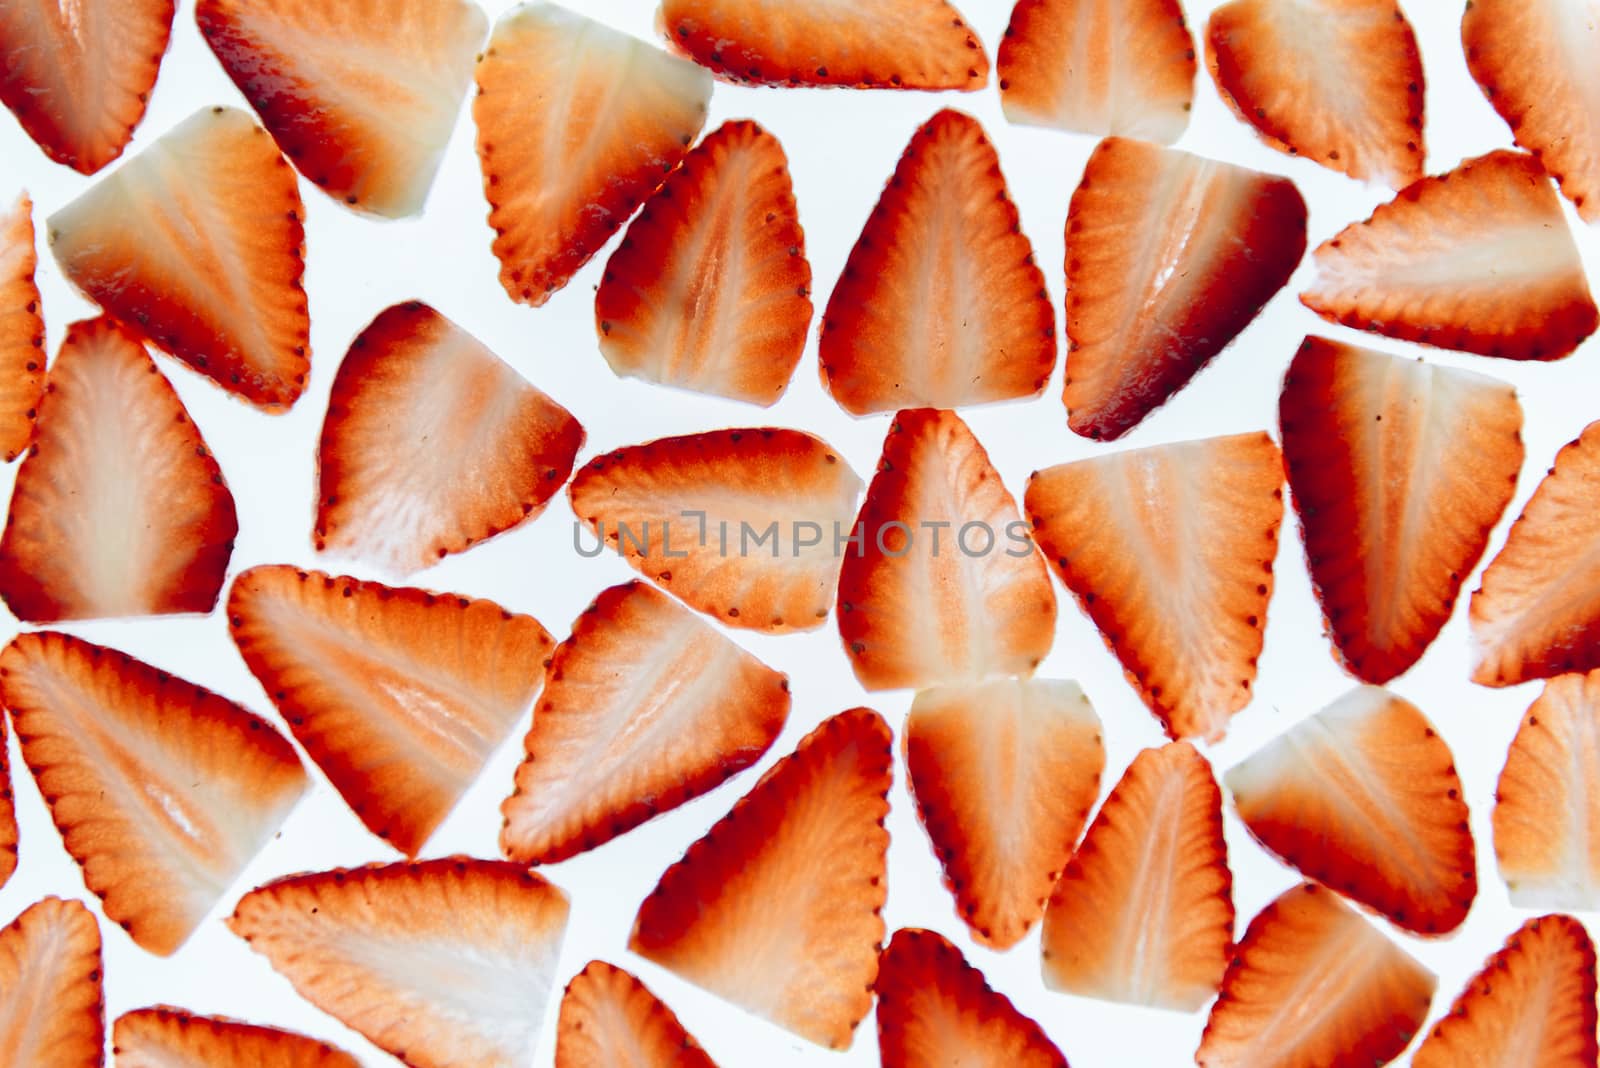 sliced fresh strawberries isolated on white background, messy arranged slices of red strawberry on a white background, healthy sweet food, vitamins and fruity concept, top view